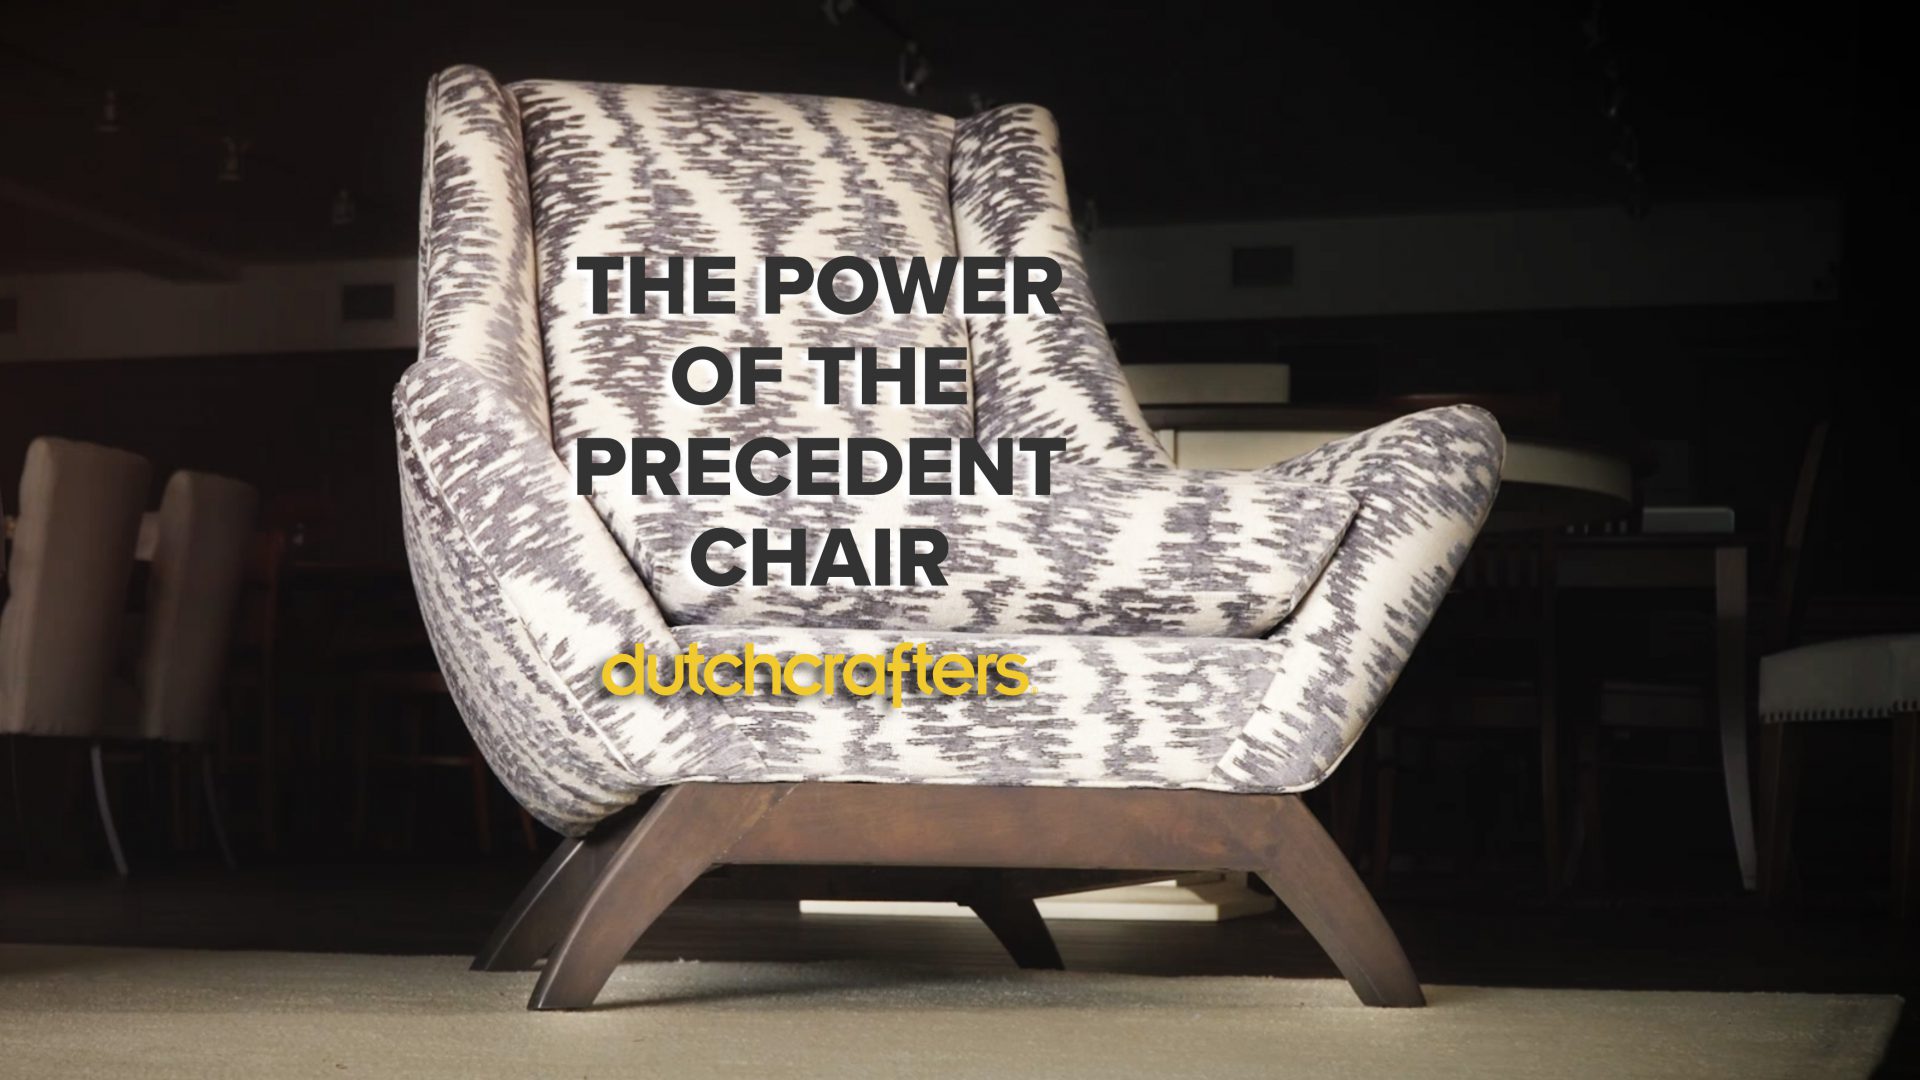 custom living room chairs from Precedent at DutchCrafters made in America